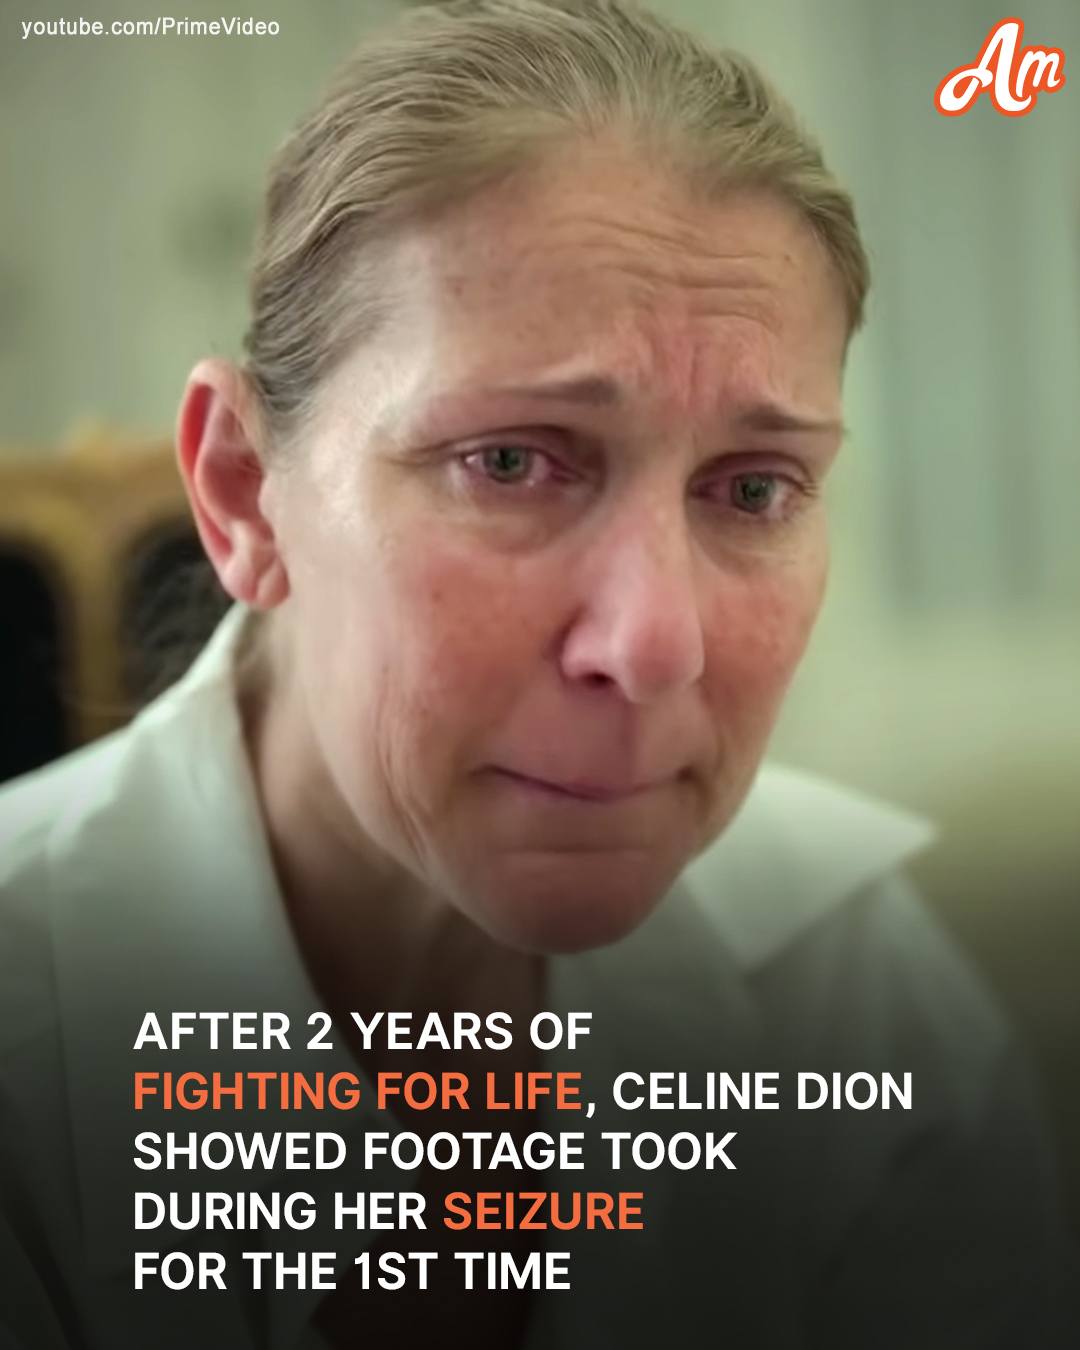 THE TRUTH ABOUT CELINE DION’S CONDITION IS ENOUGH TO LEAVE YOU SPEECHLESS. The details that she revealed are in the comments.👇